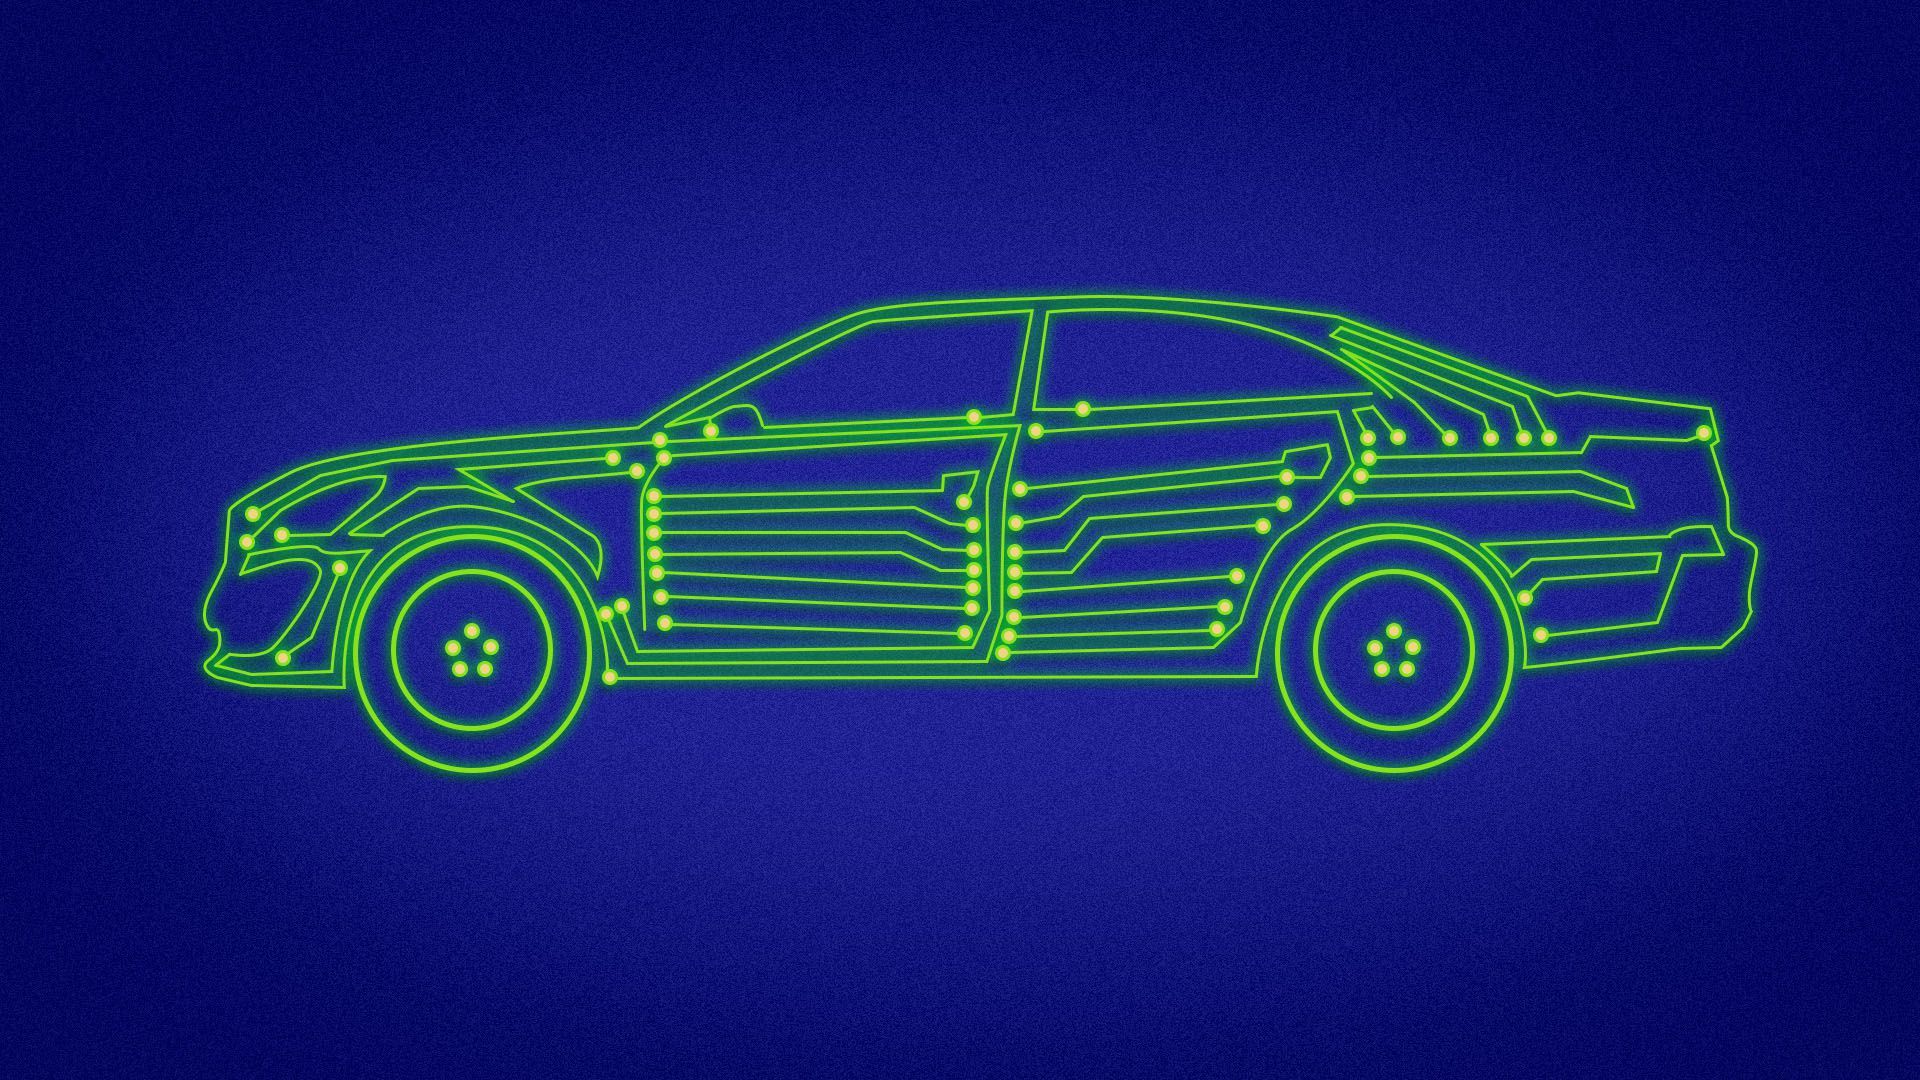 Illustration of a glowing motherboard connections in the shape of a car